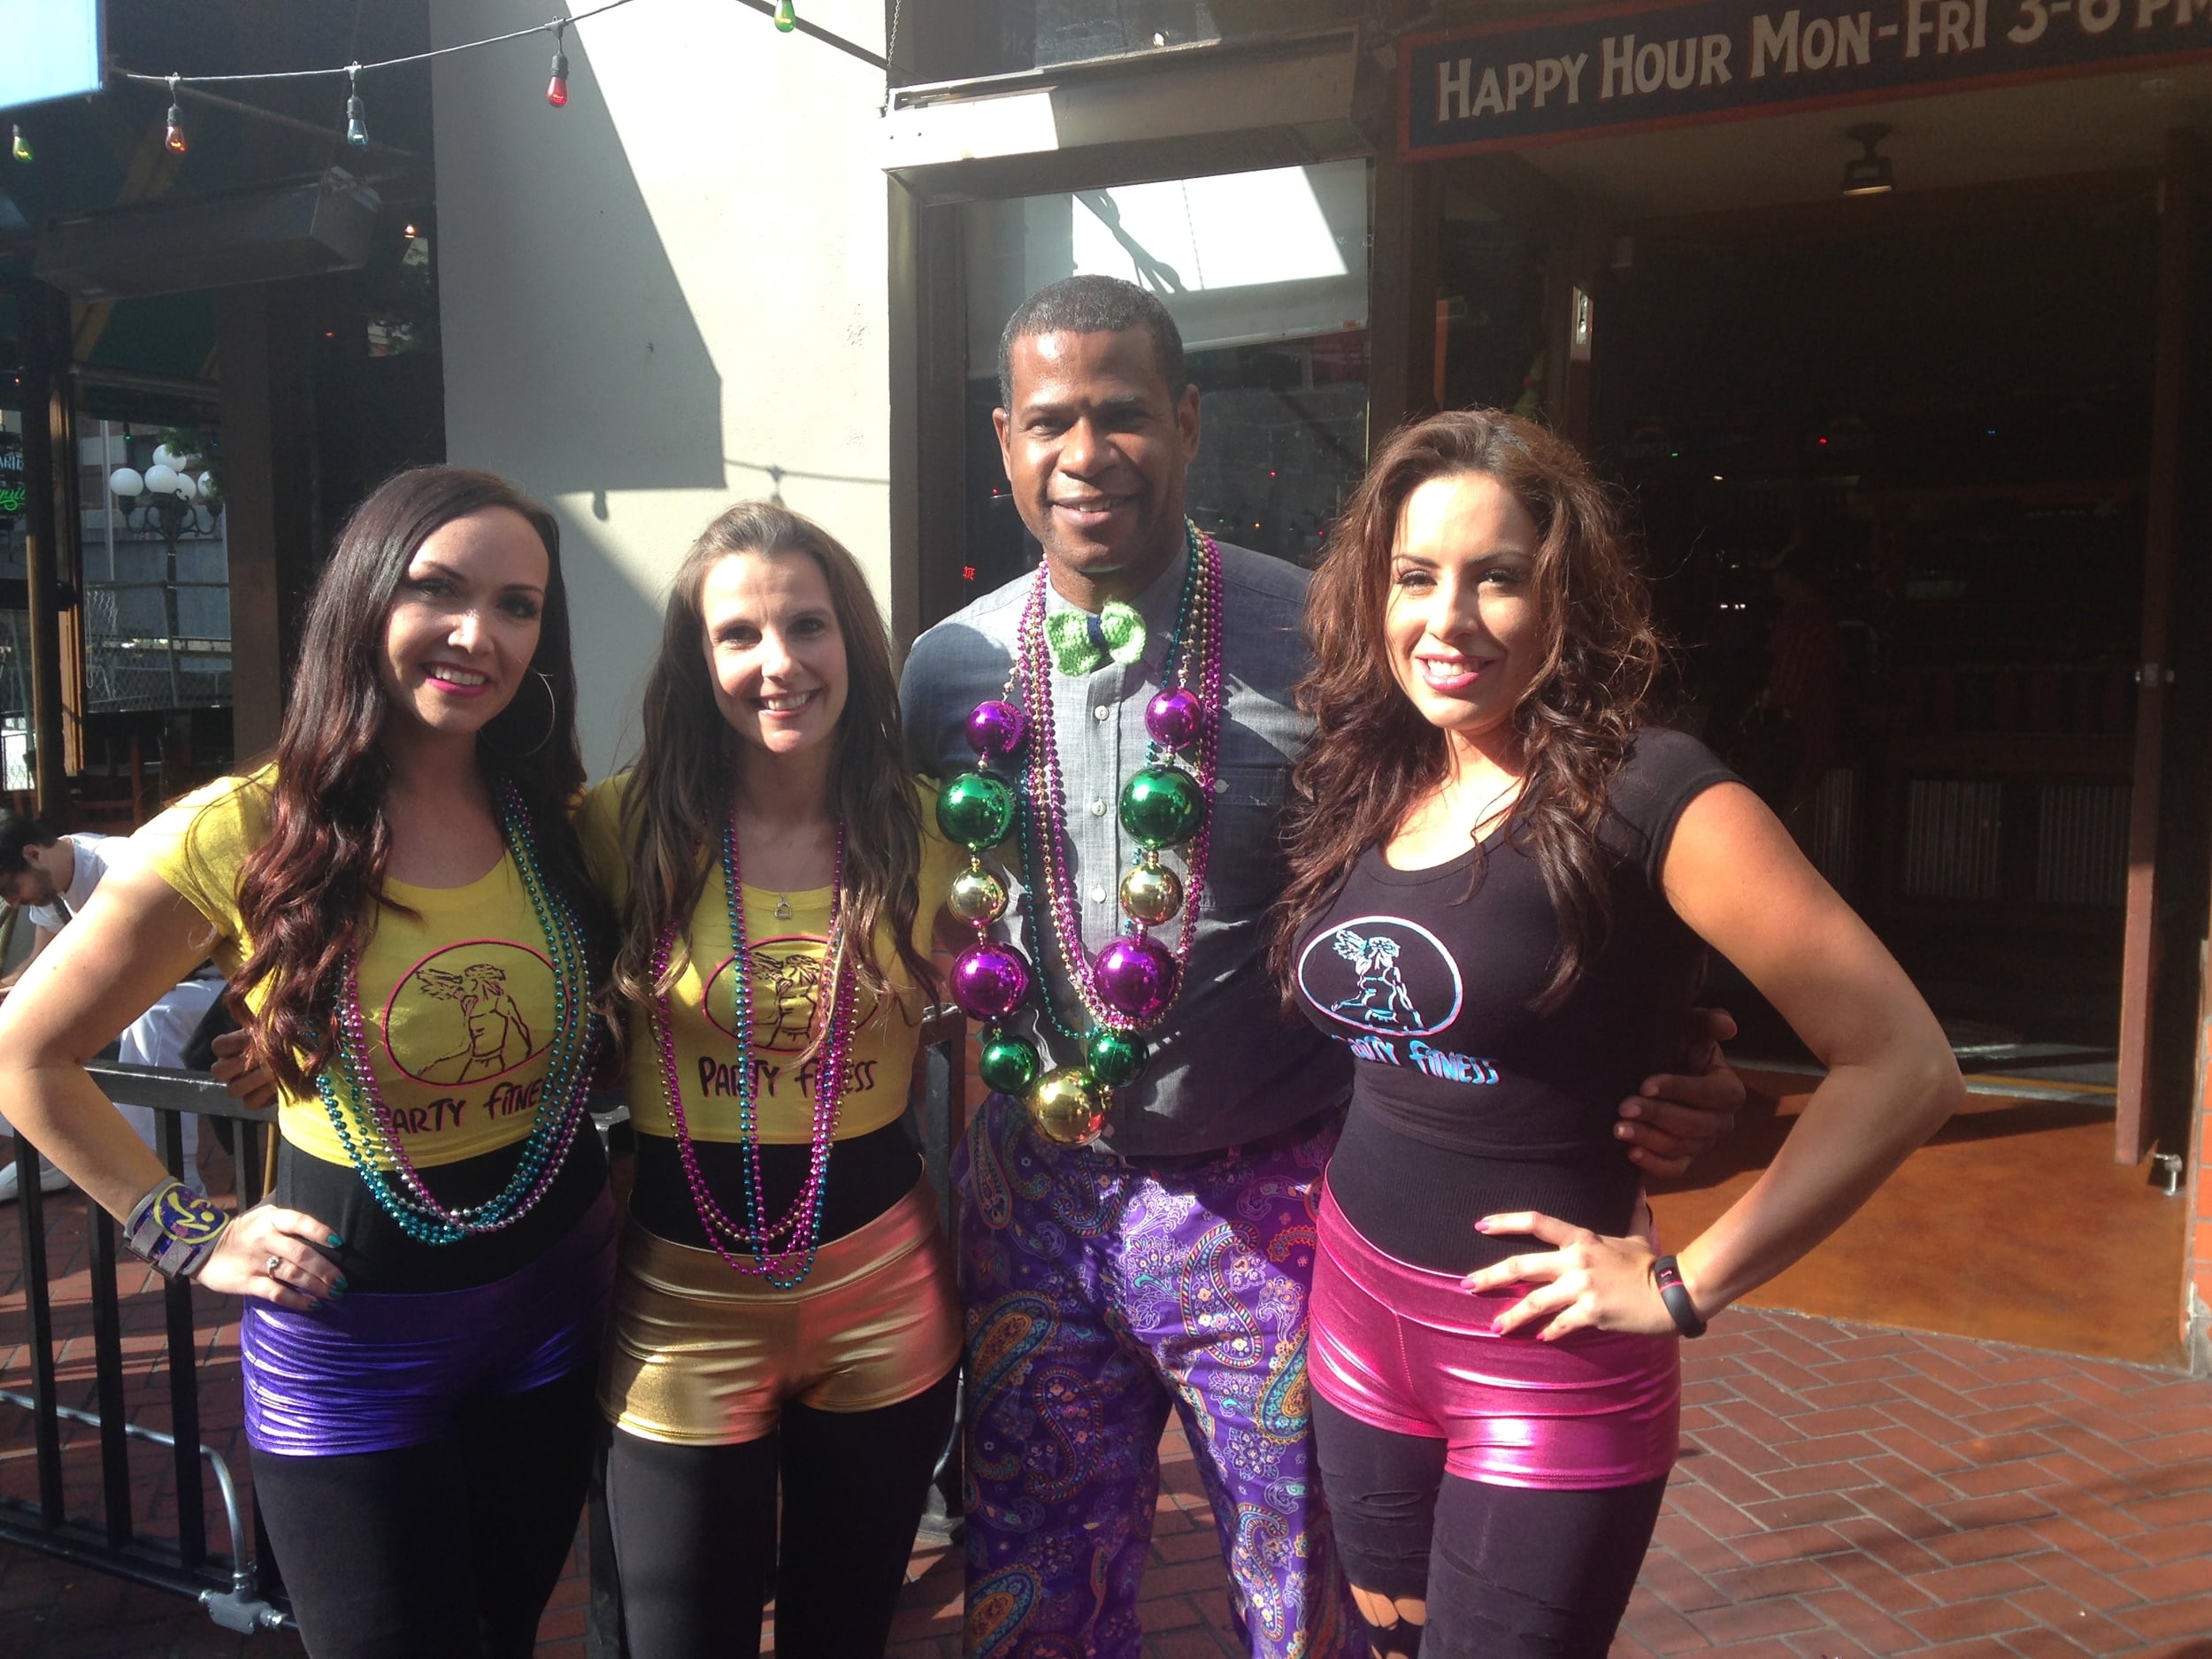 Party Fitness at Fox 5 News Promoting Mardi Gras